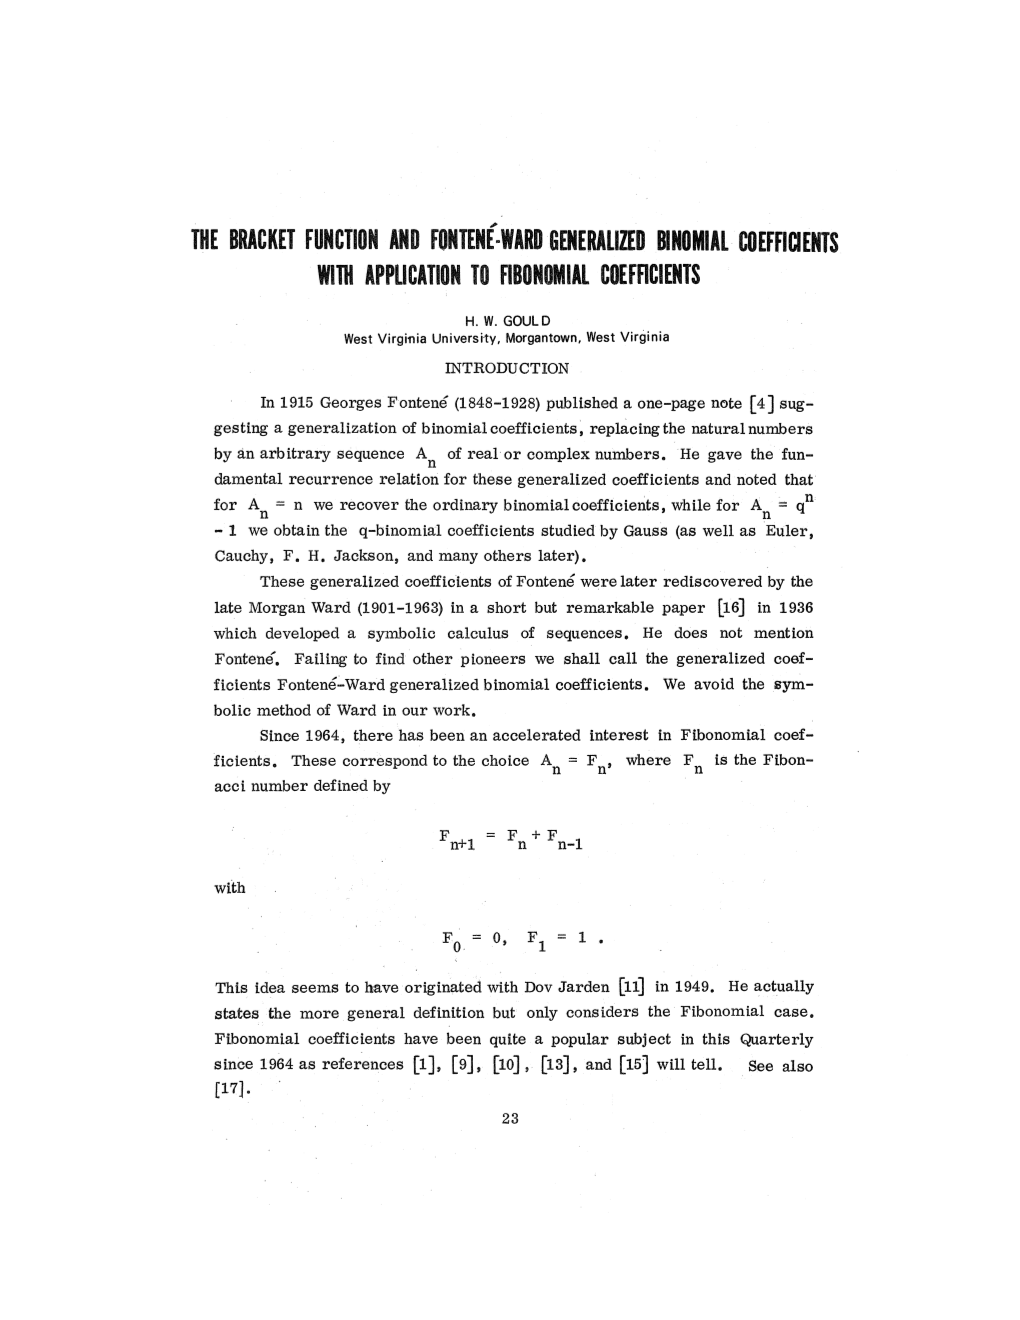 The Bracket Function and Fontene-Ward Generalized Binomial Coefficients with Application to Fibonomial Coefficients